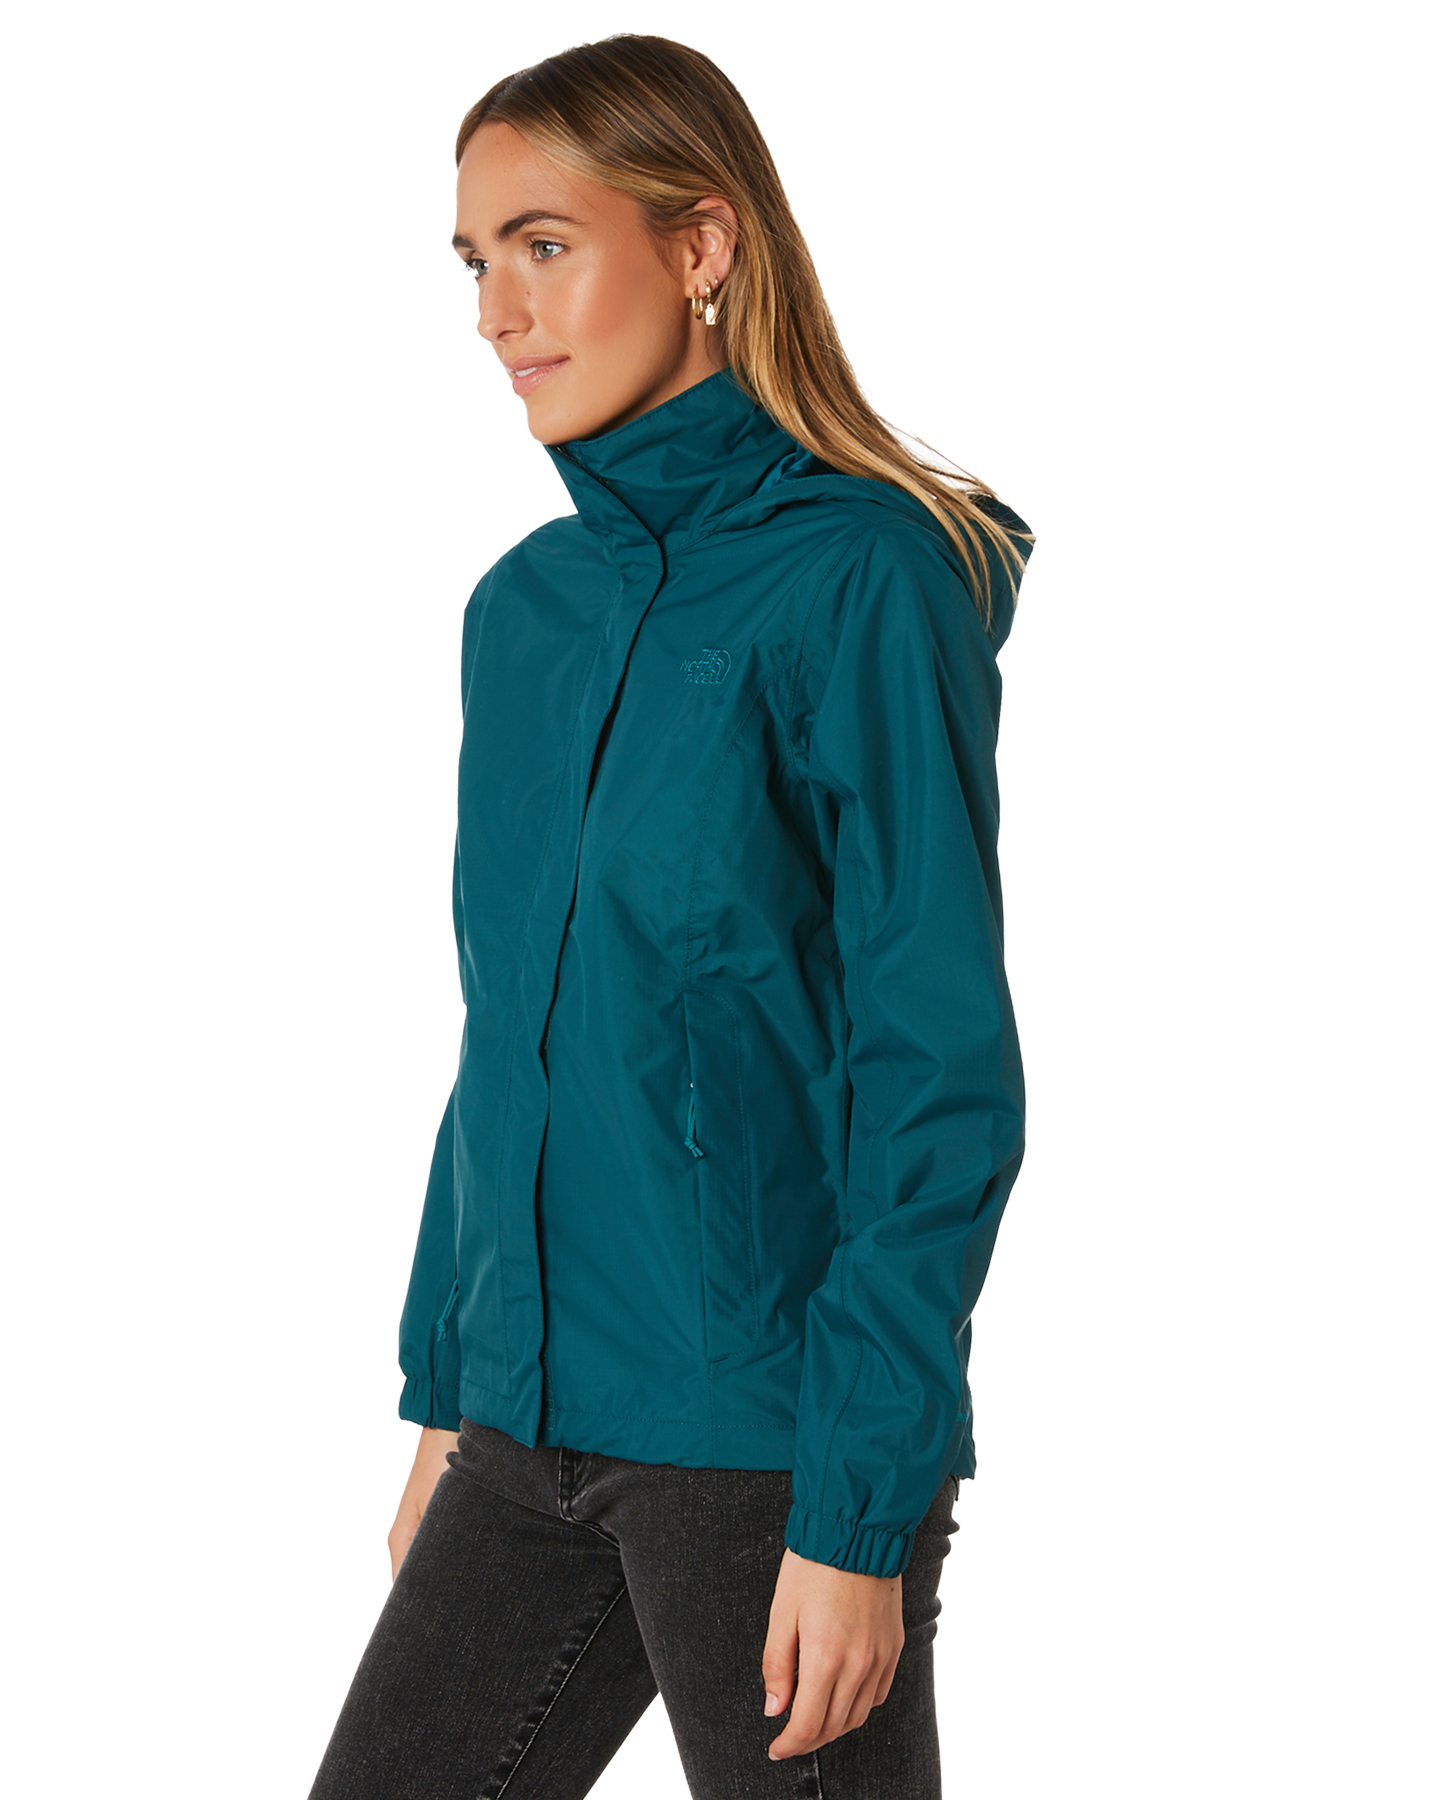 The North Face Womens Resolve 2 Jacket - Deep Teal Blue | SurfStitch